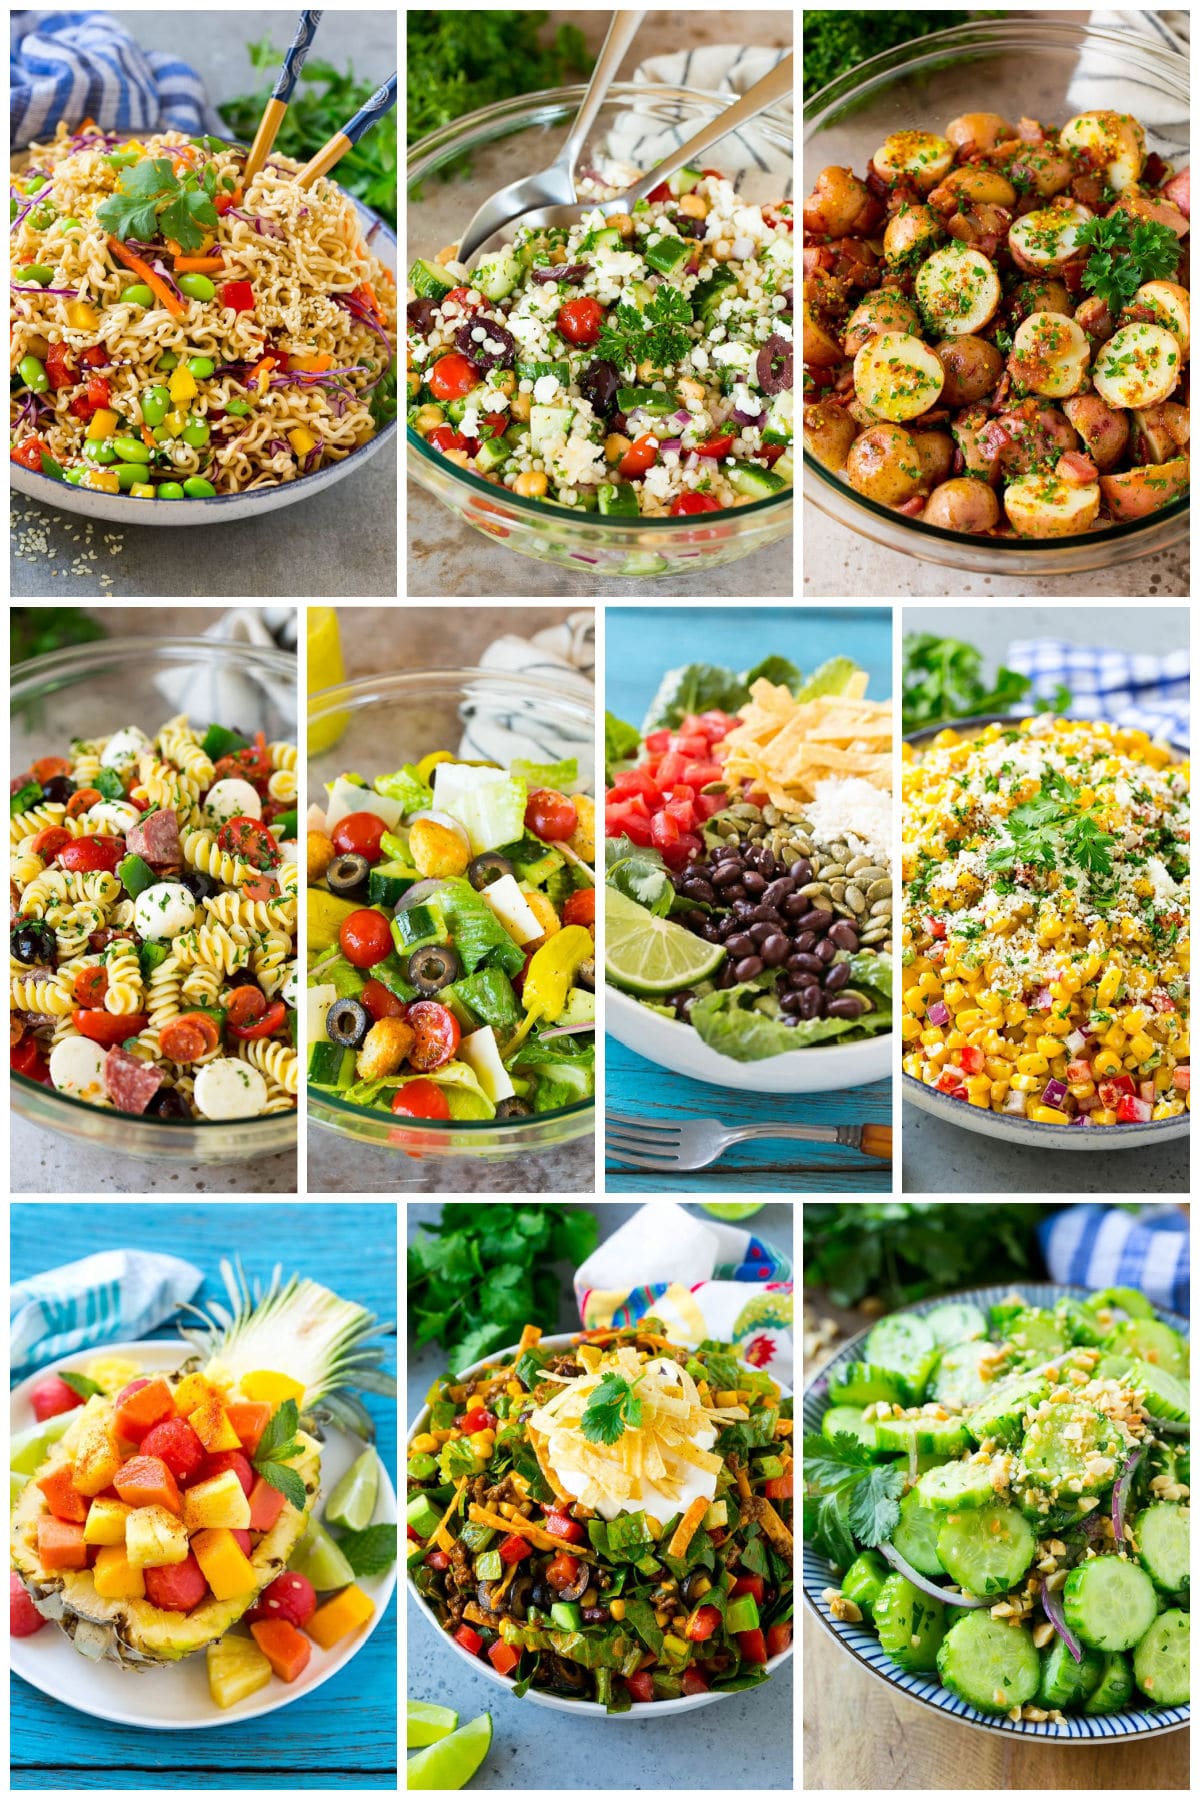 A group of refreshing summer salad recipes such as Mexican corn salad, Thai cucumber salad and Italian salad.